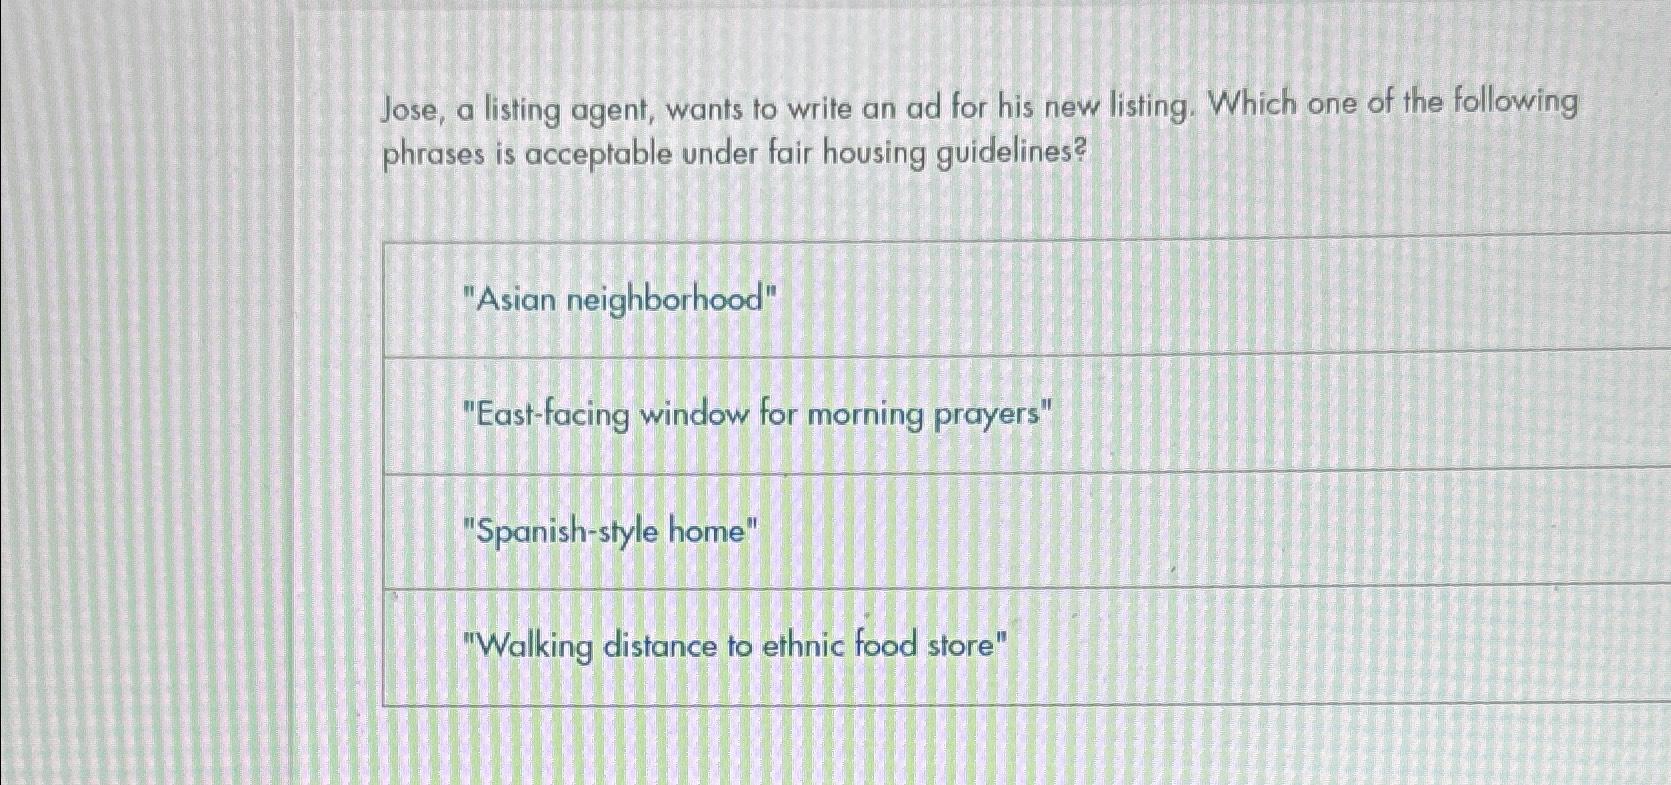 Jose, a listing agent, wants to write an ad for his new listing. Which one of the following phrases is